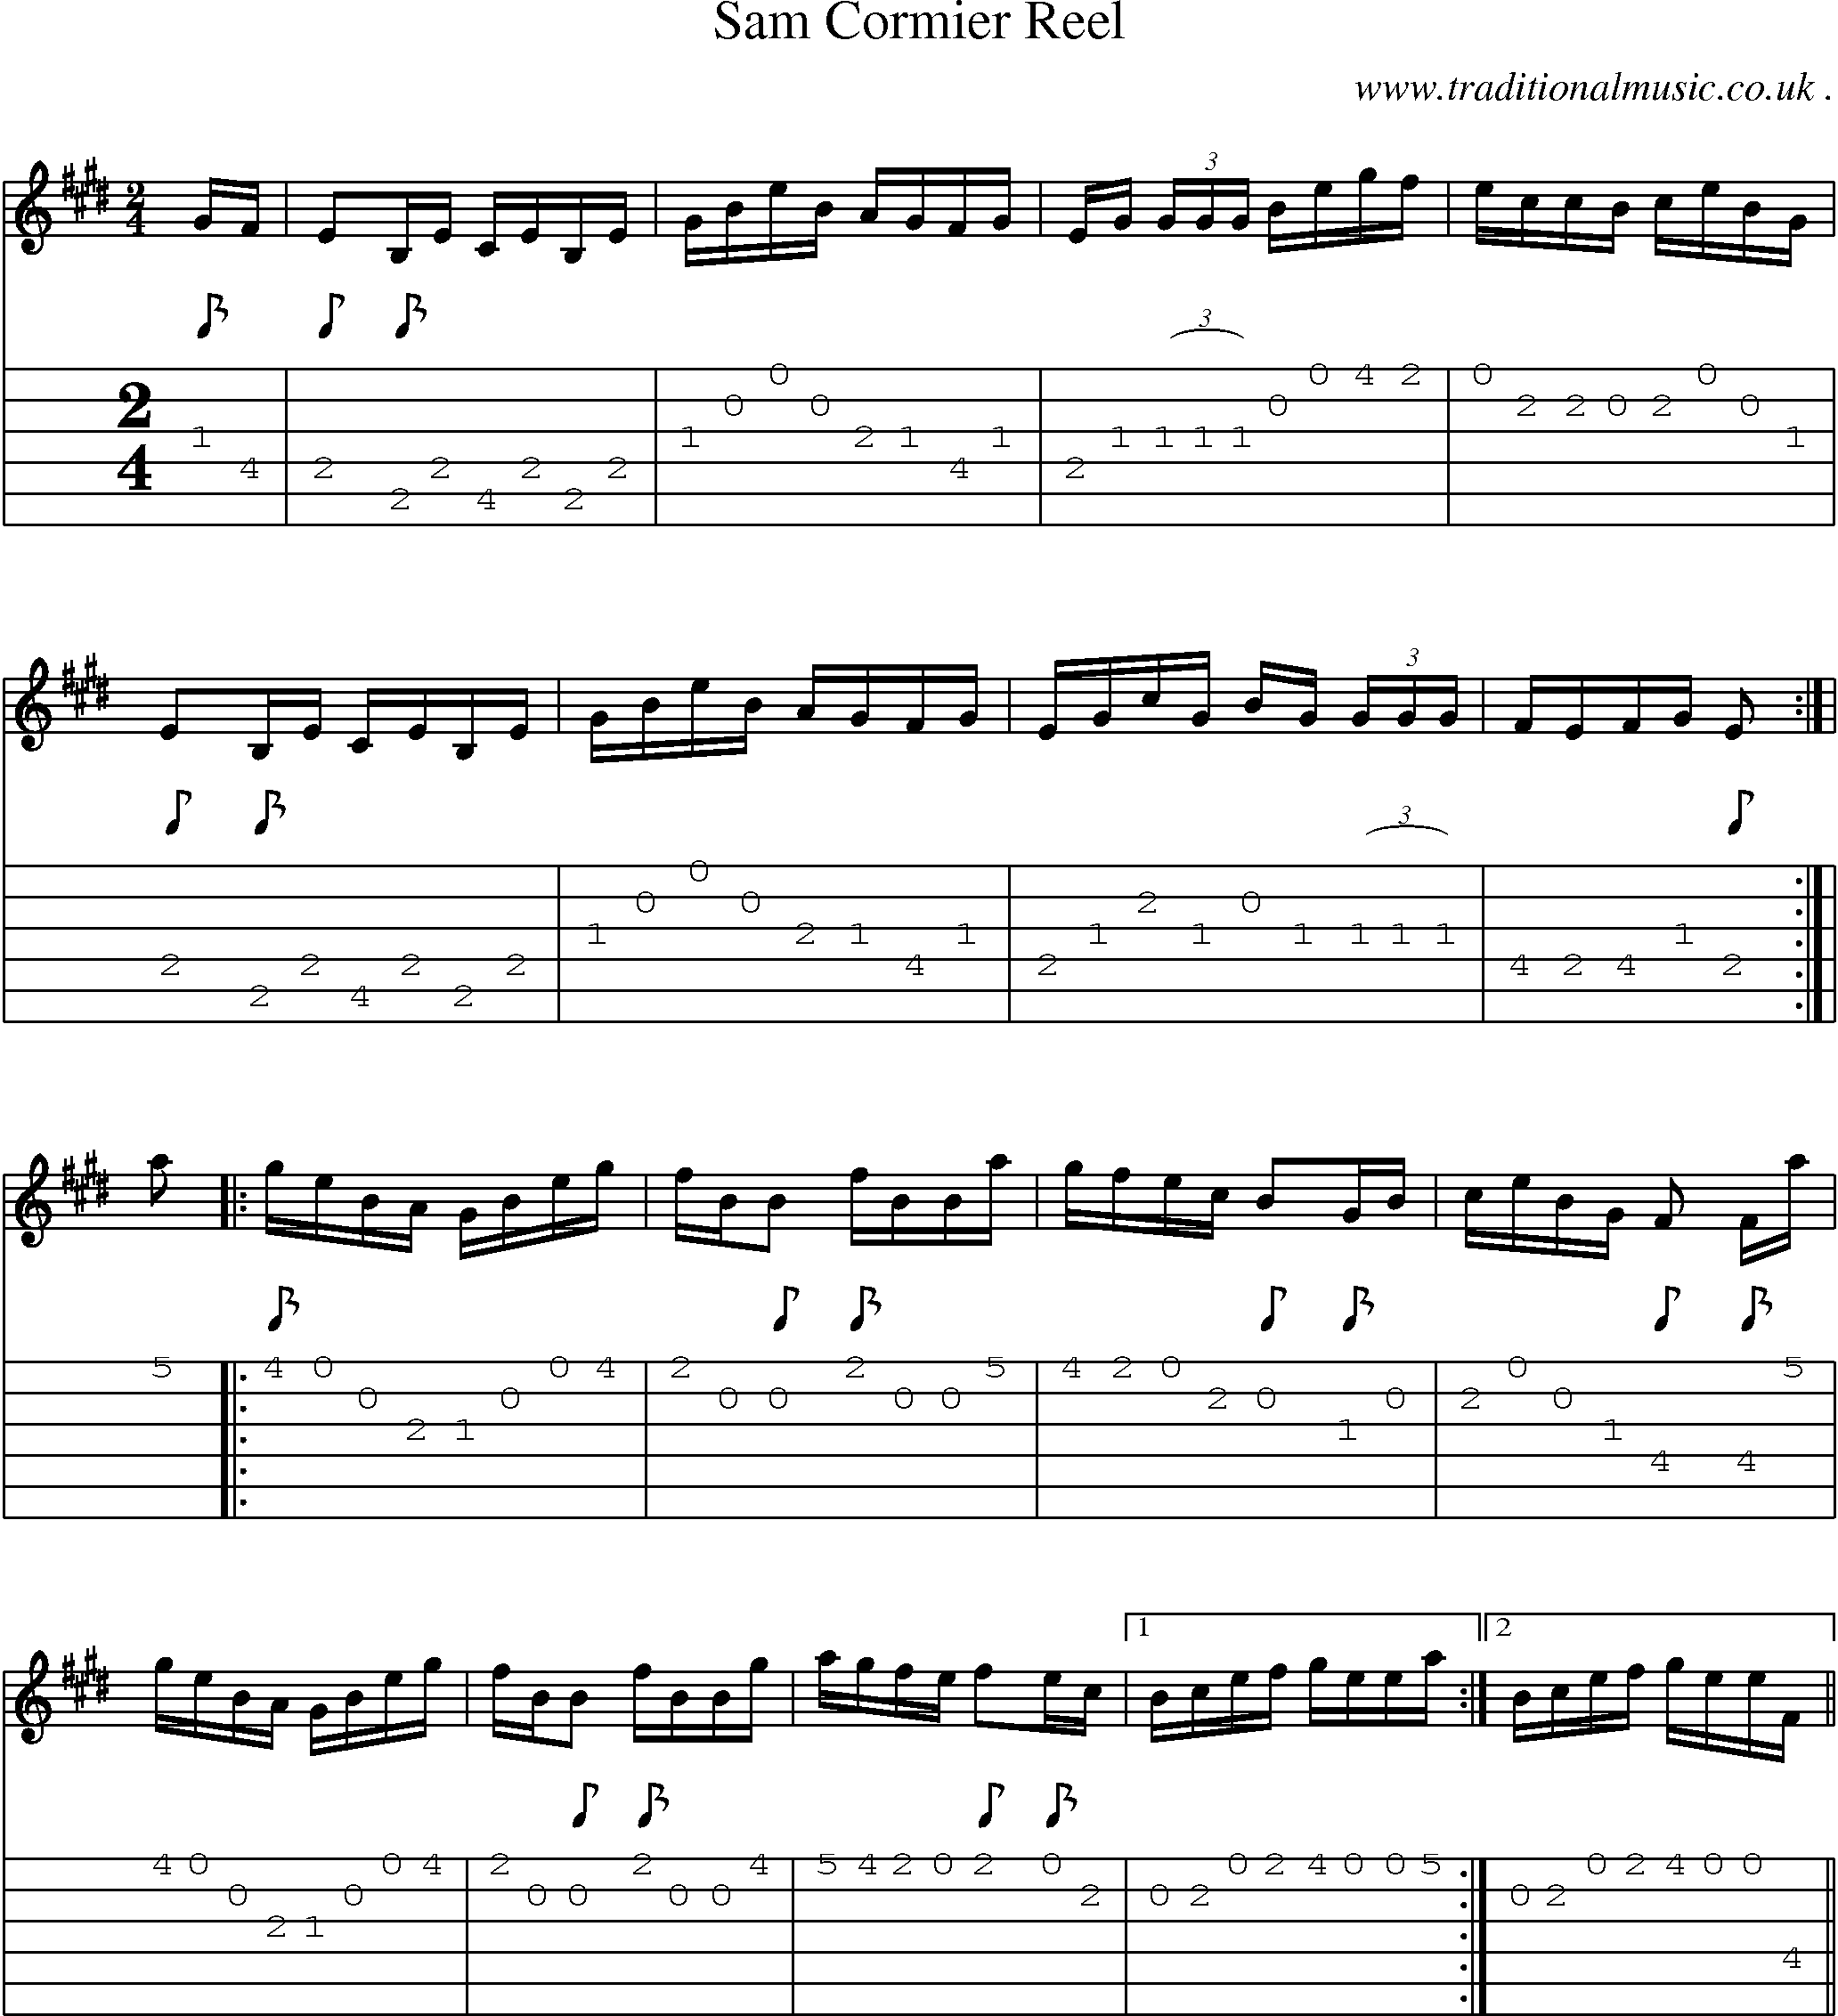 Sheet-Music and Guitar Tabs for Sam Cormier Reel